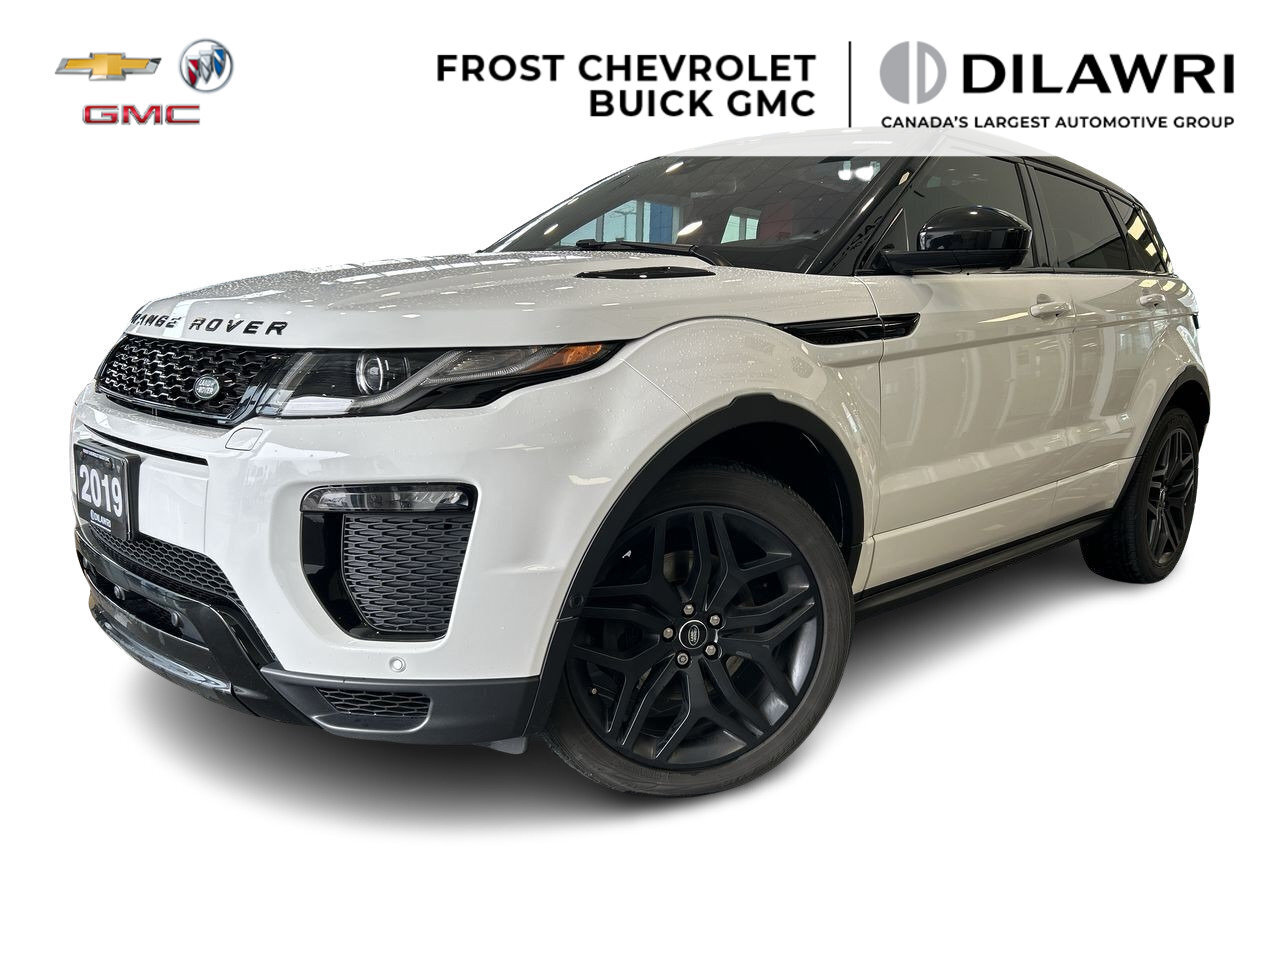 2019 Land Rover Range Rover Evoque 237hp HSE DYNAMIC Clean Carfax I One Owner I Leath